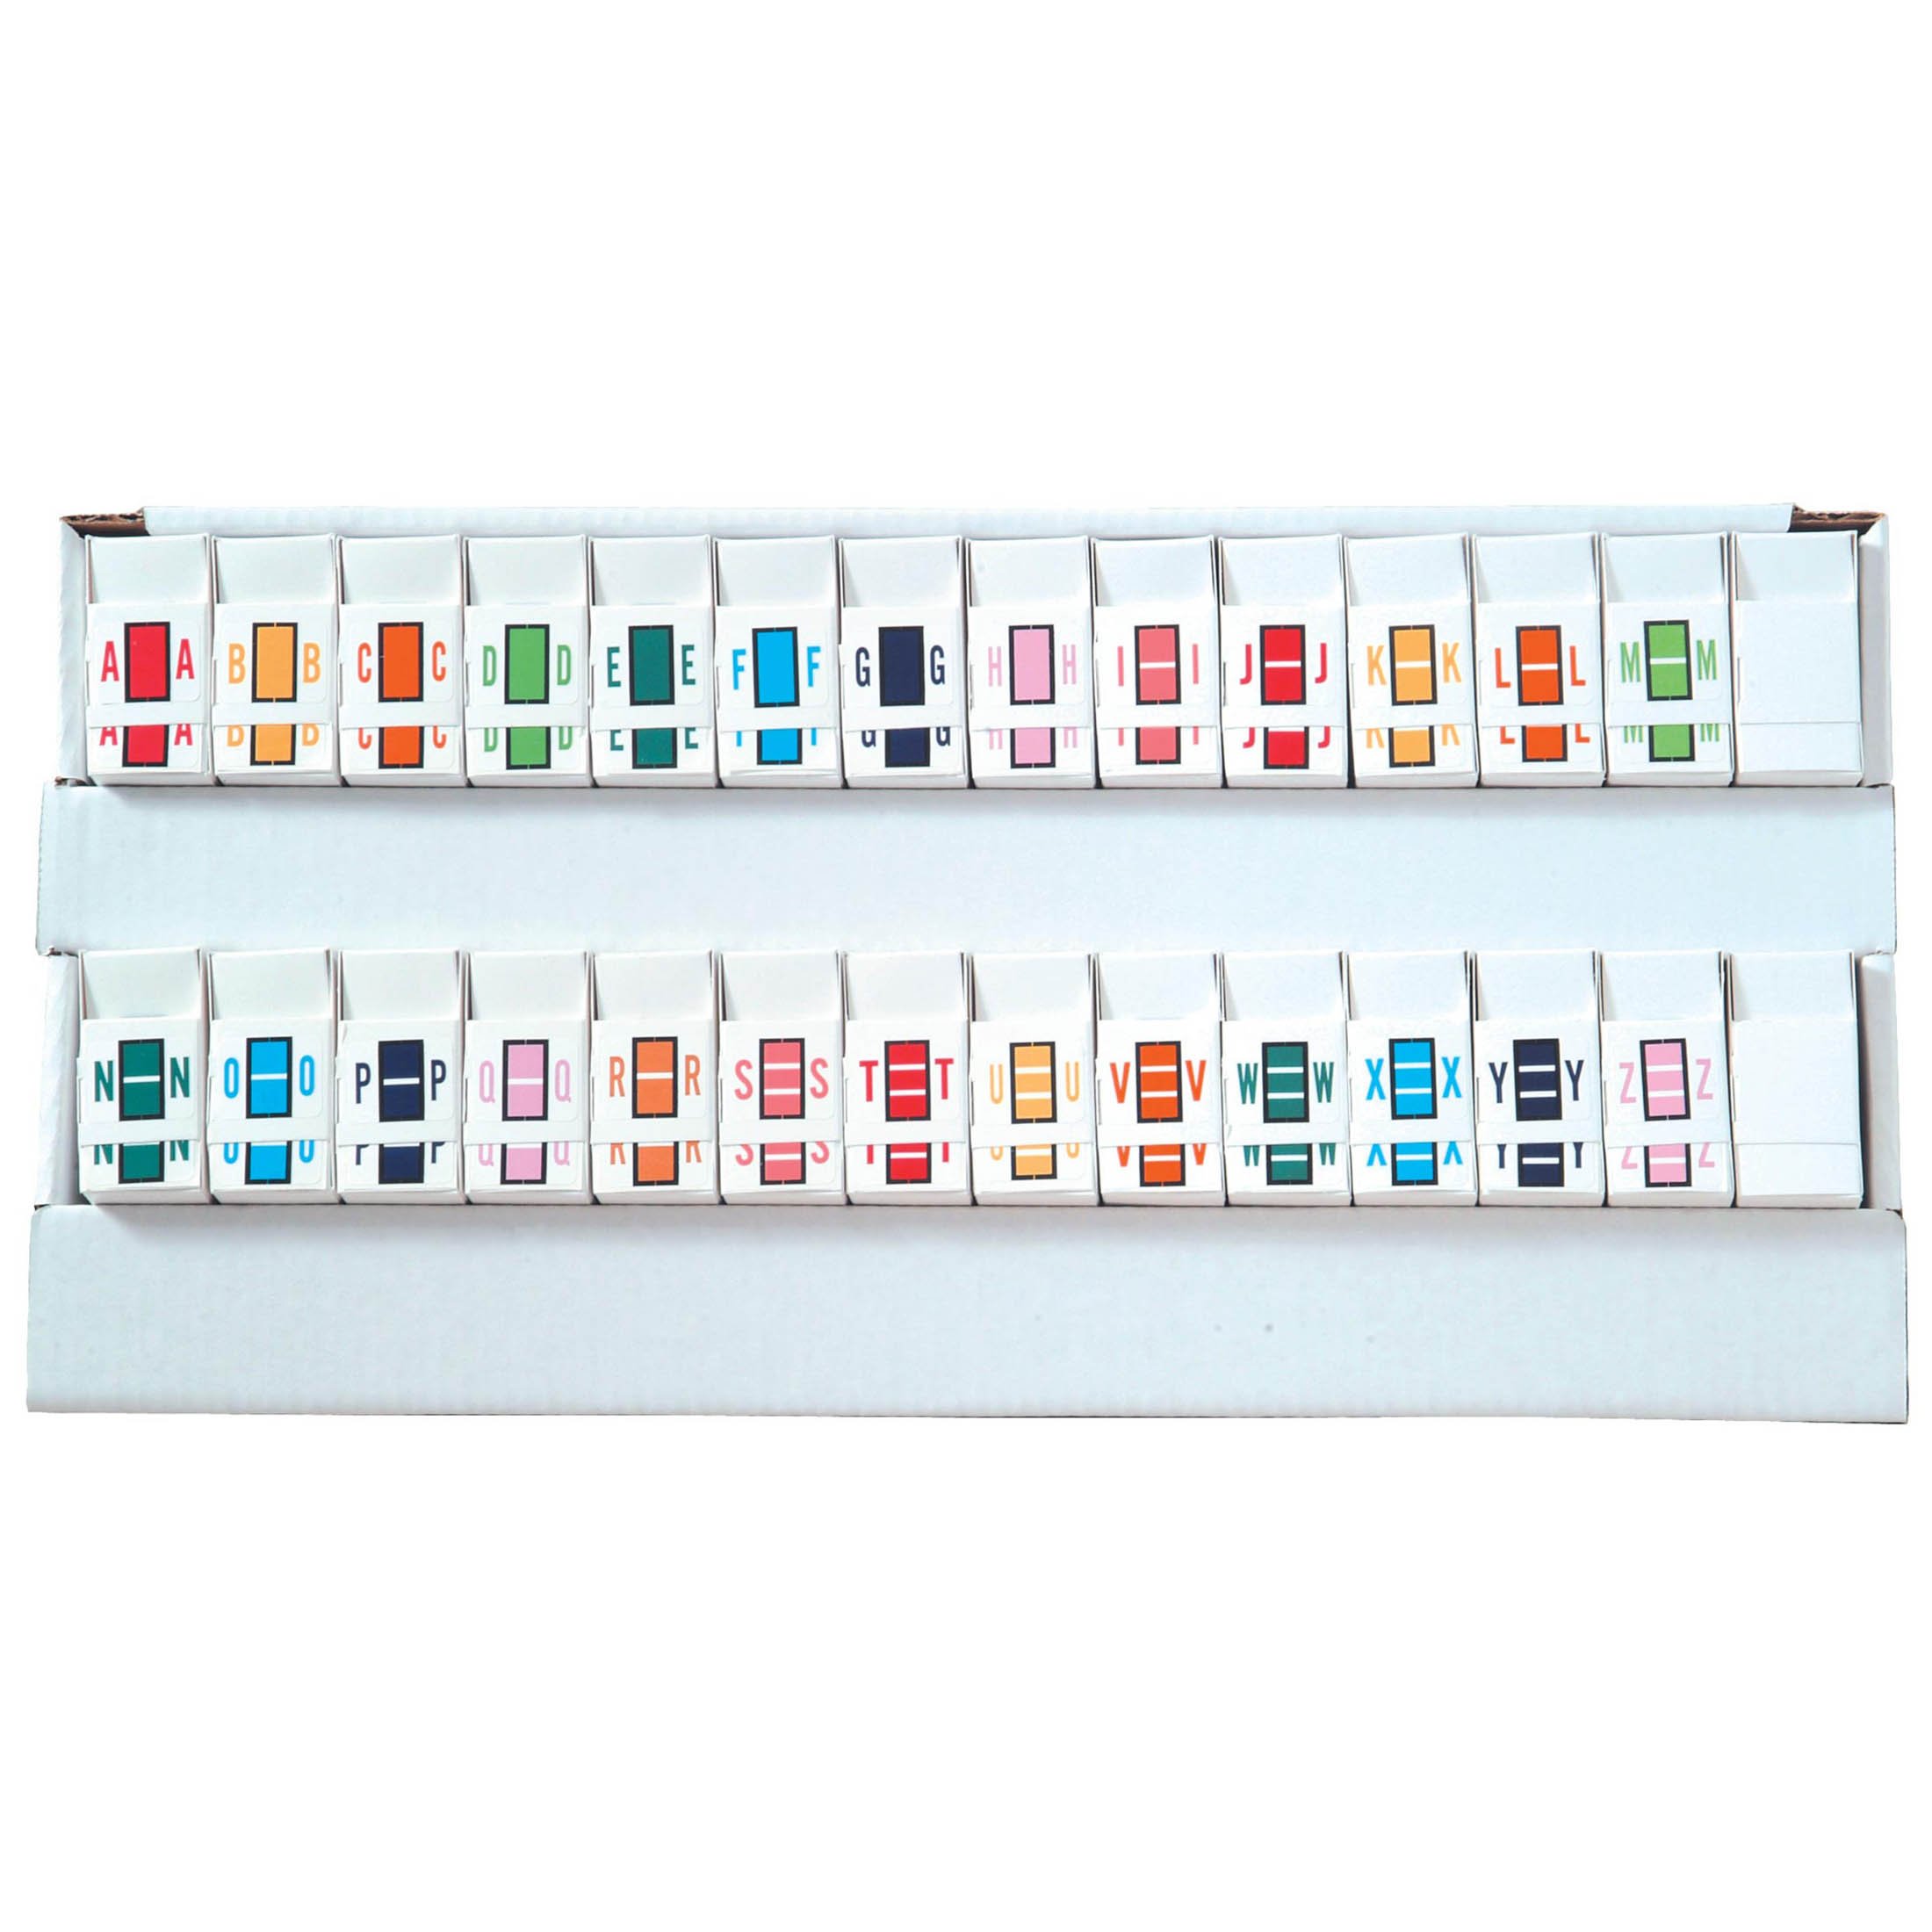 Tab Products 1283 Match Alpha Roll Labels A-Z Set